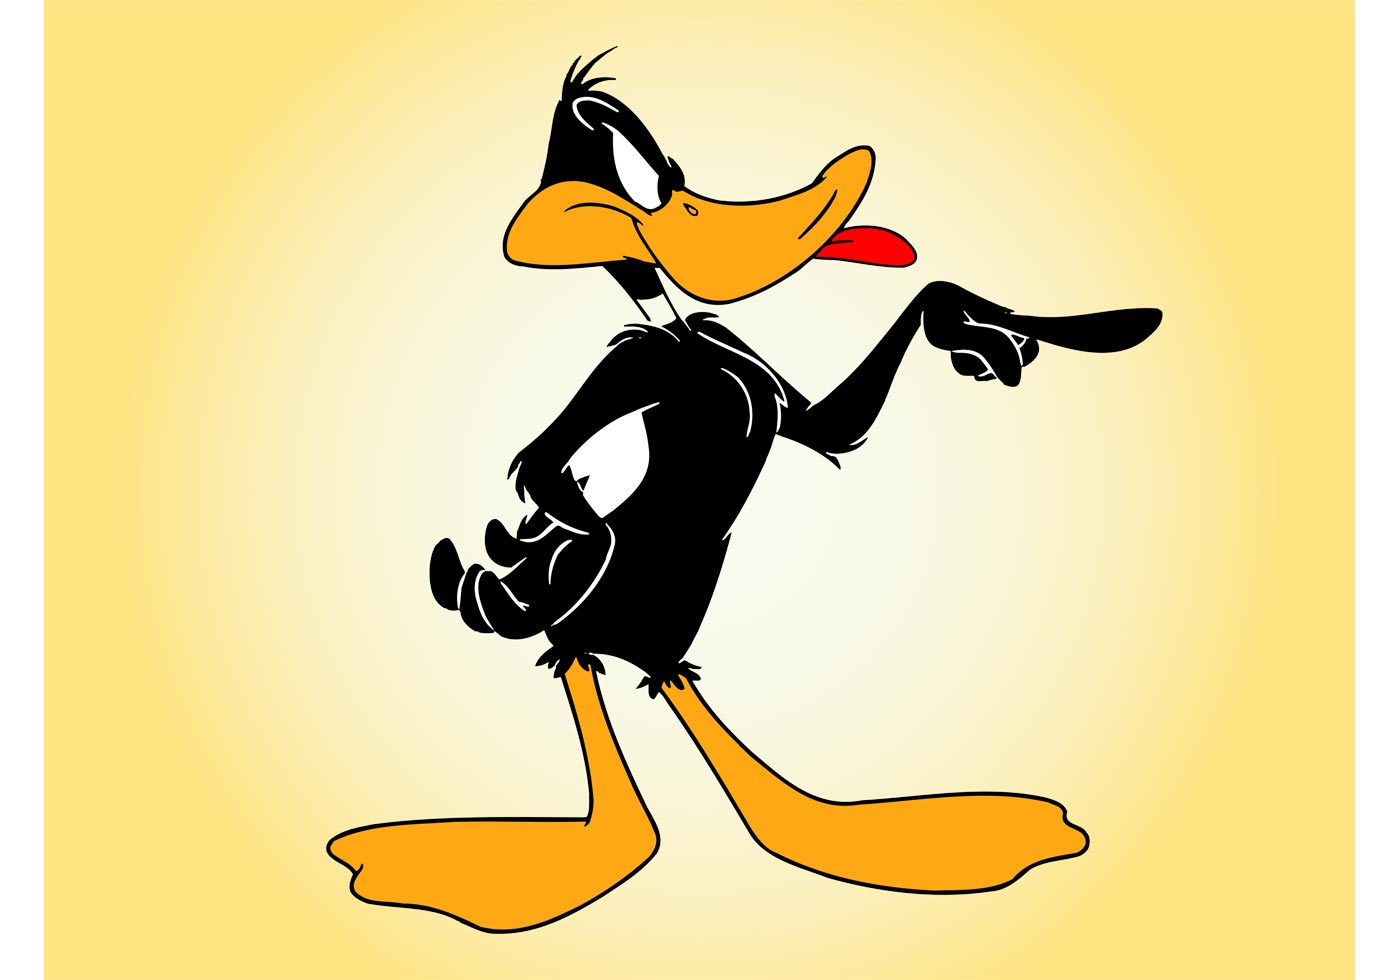 Download Daffy Duck Graphics.